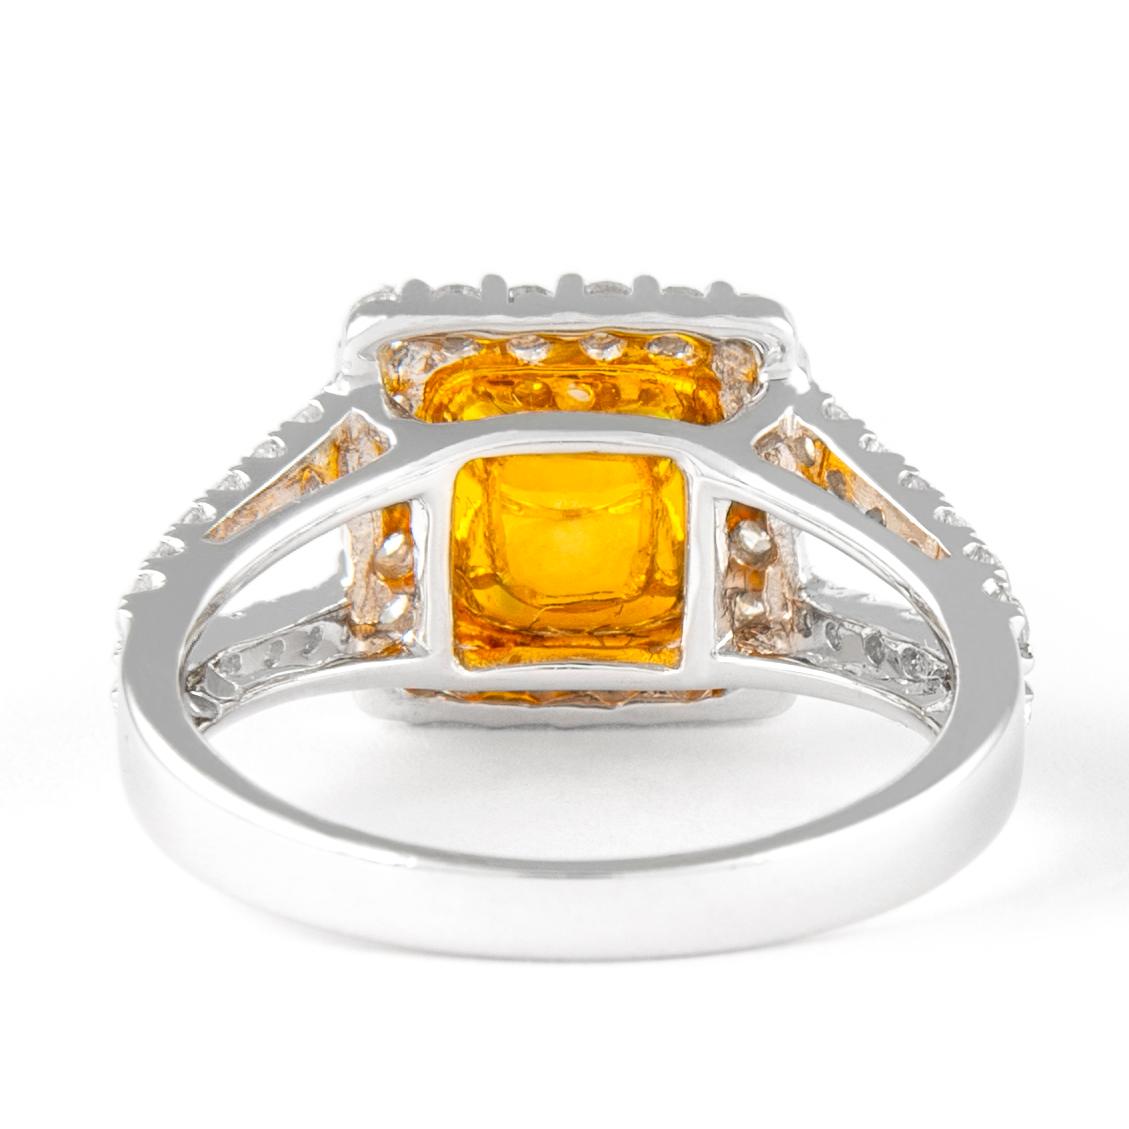 Alexander 2.72ctt Fancy Yellow Cushion Diamond with Halo Ring 18k Two Tone In New Condition For Sale In BEVERLY HILLS, CA